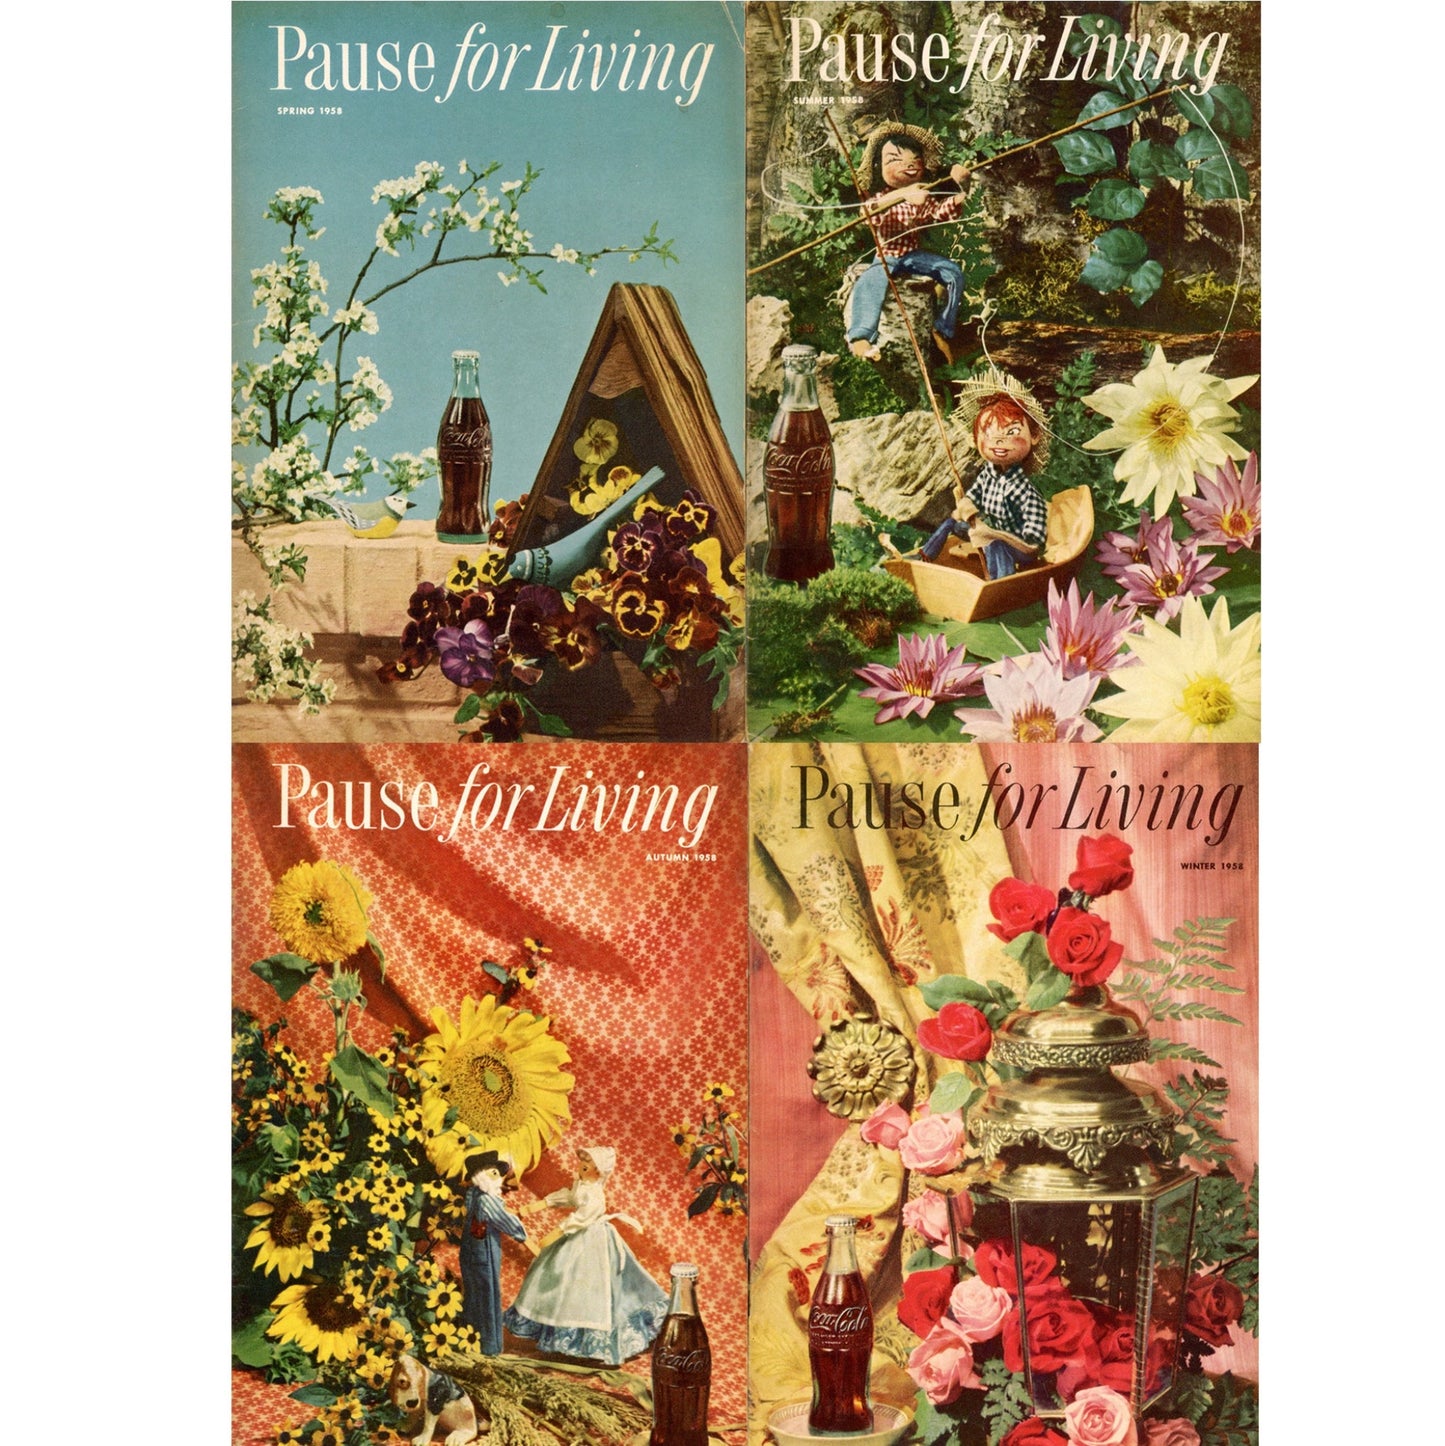 PAUSE FOR LIVING Coca-Cola Advertising Booklets from 1958 Full Year | Set of Four